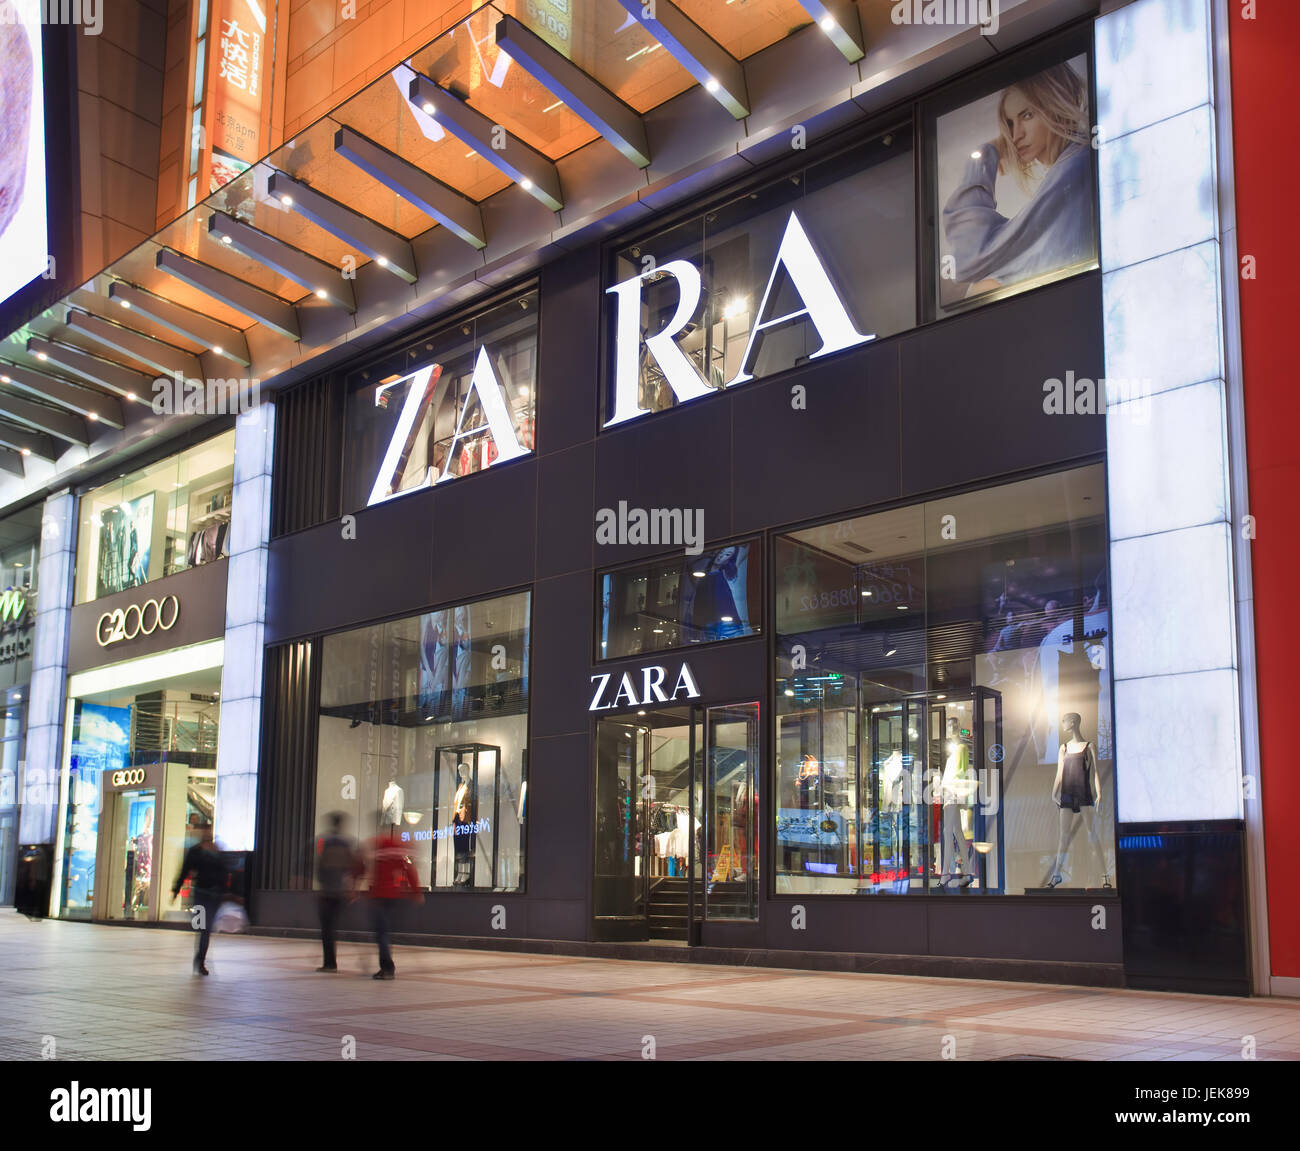 Zara Entrance High Resolution Stock Photography and Images - Alamy